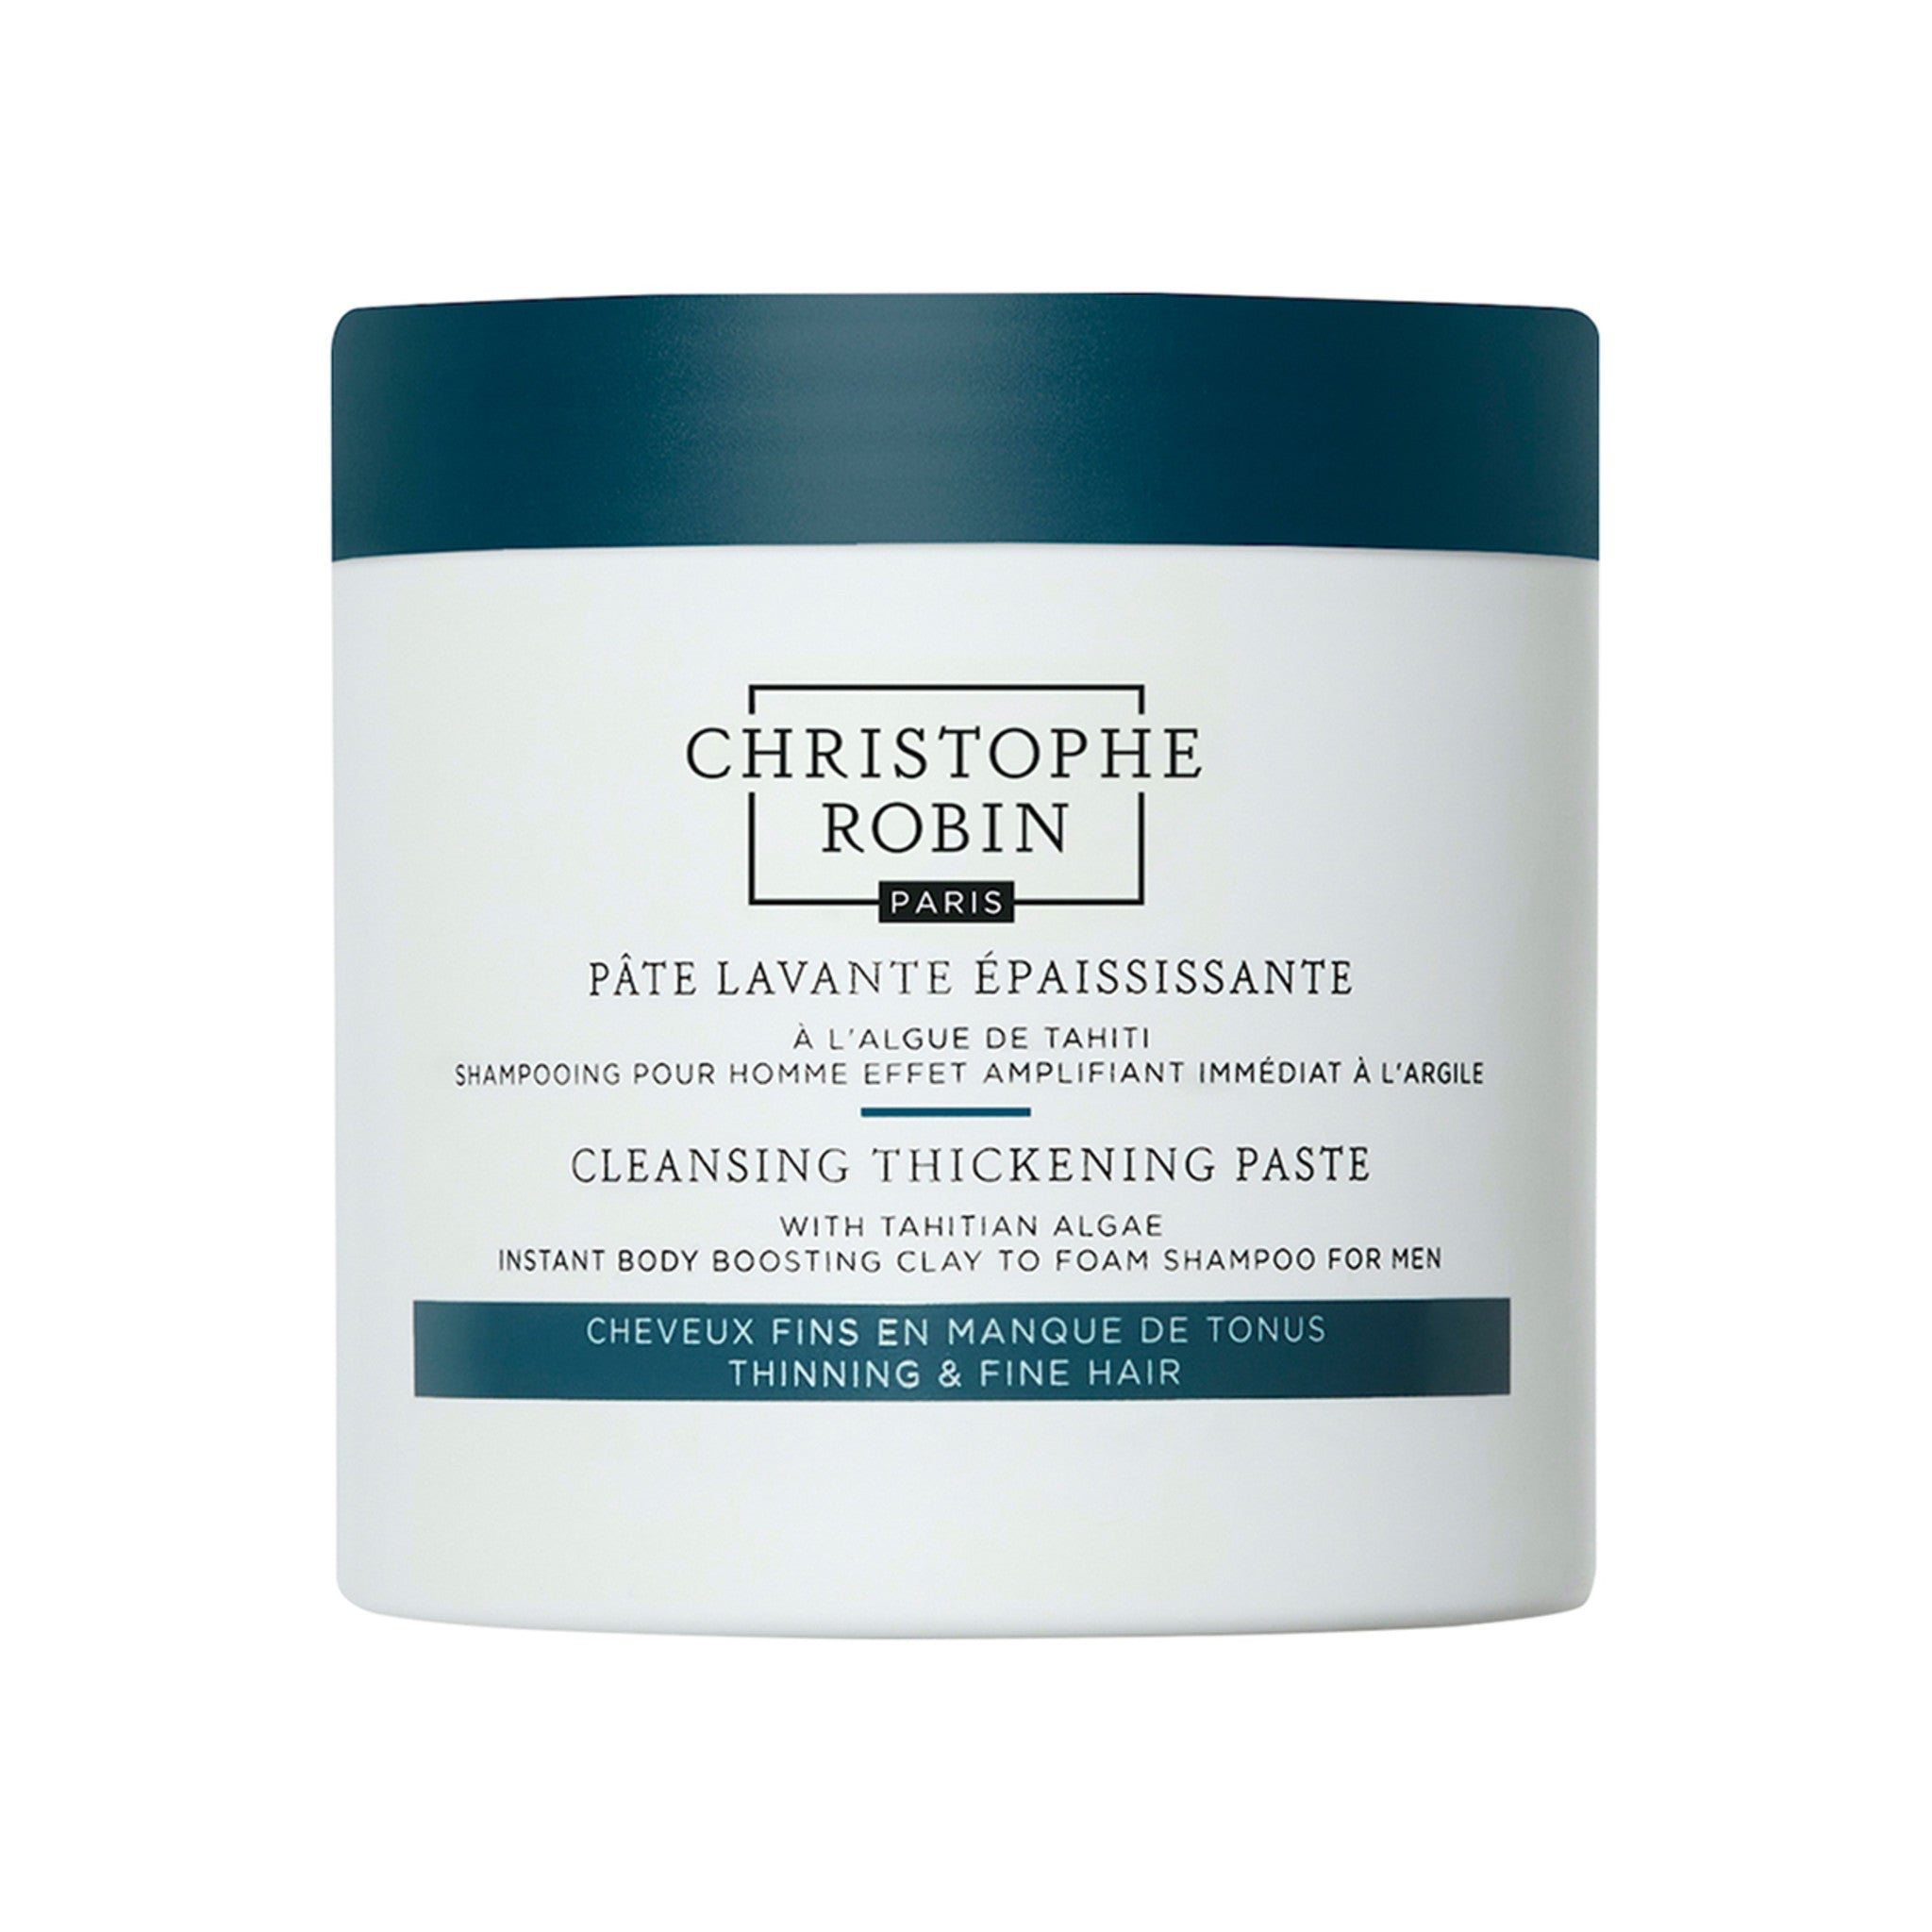 Christophe Robin Cleansing Thickening Paste for Men main image.